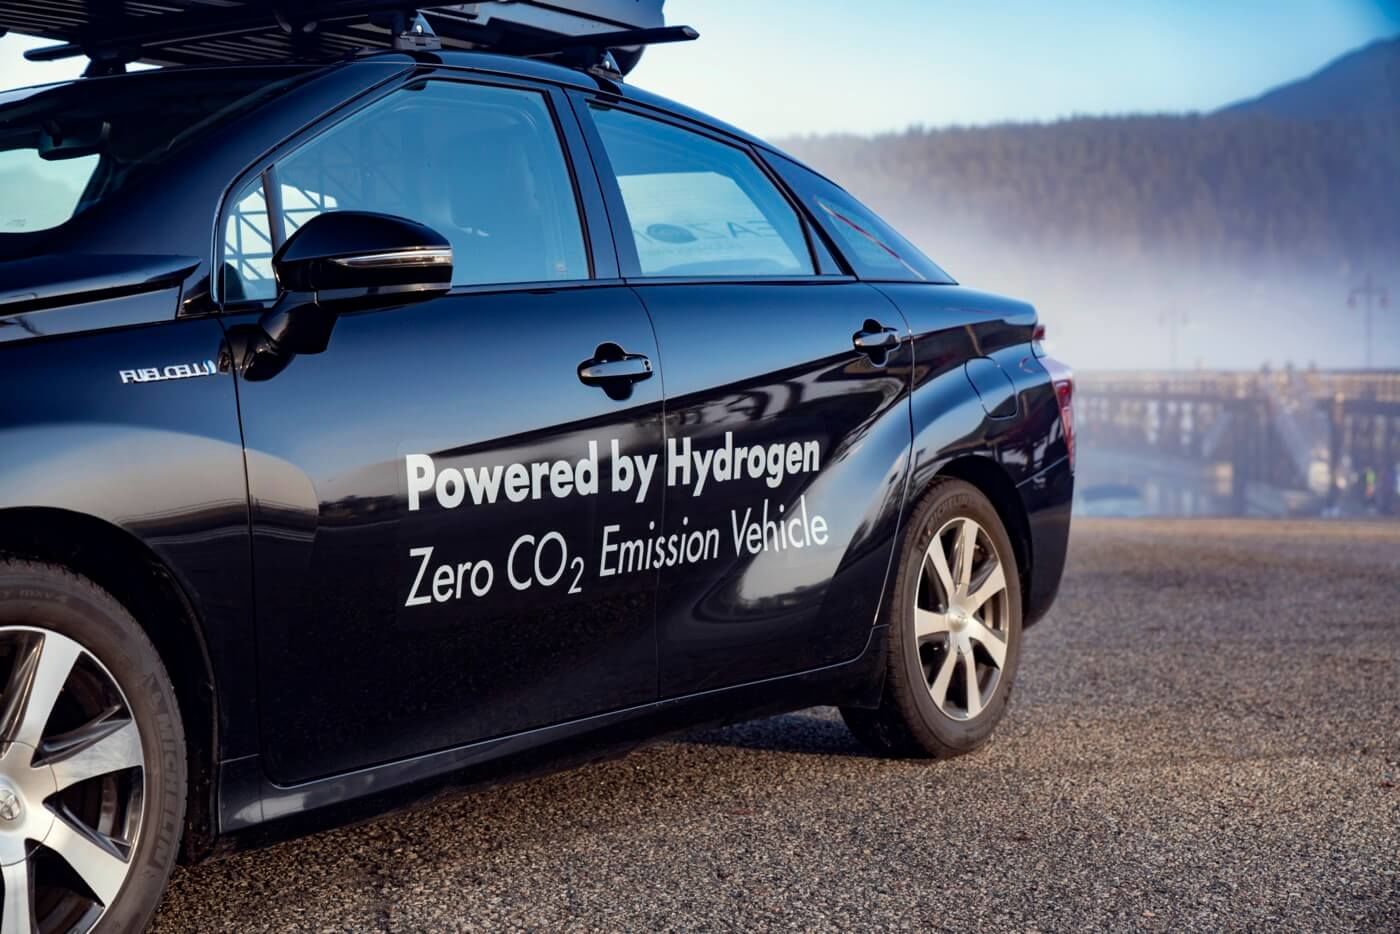 Powered by Hydrogen Zero CO2 Emission Vehicle printed on the side of a Toyota Mirai